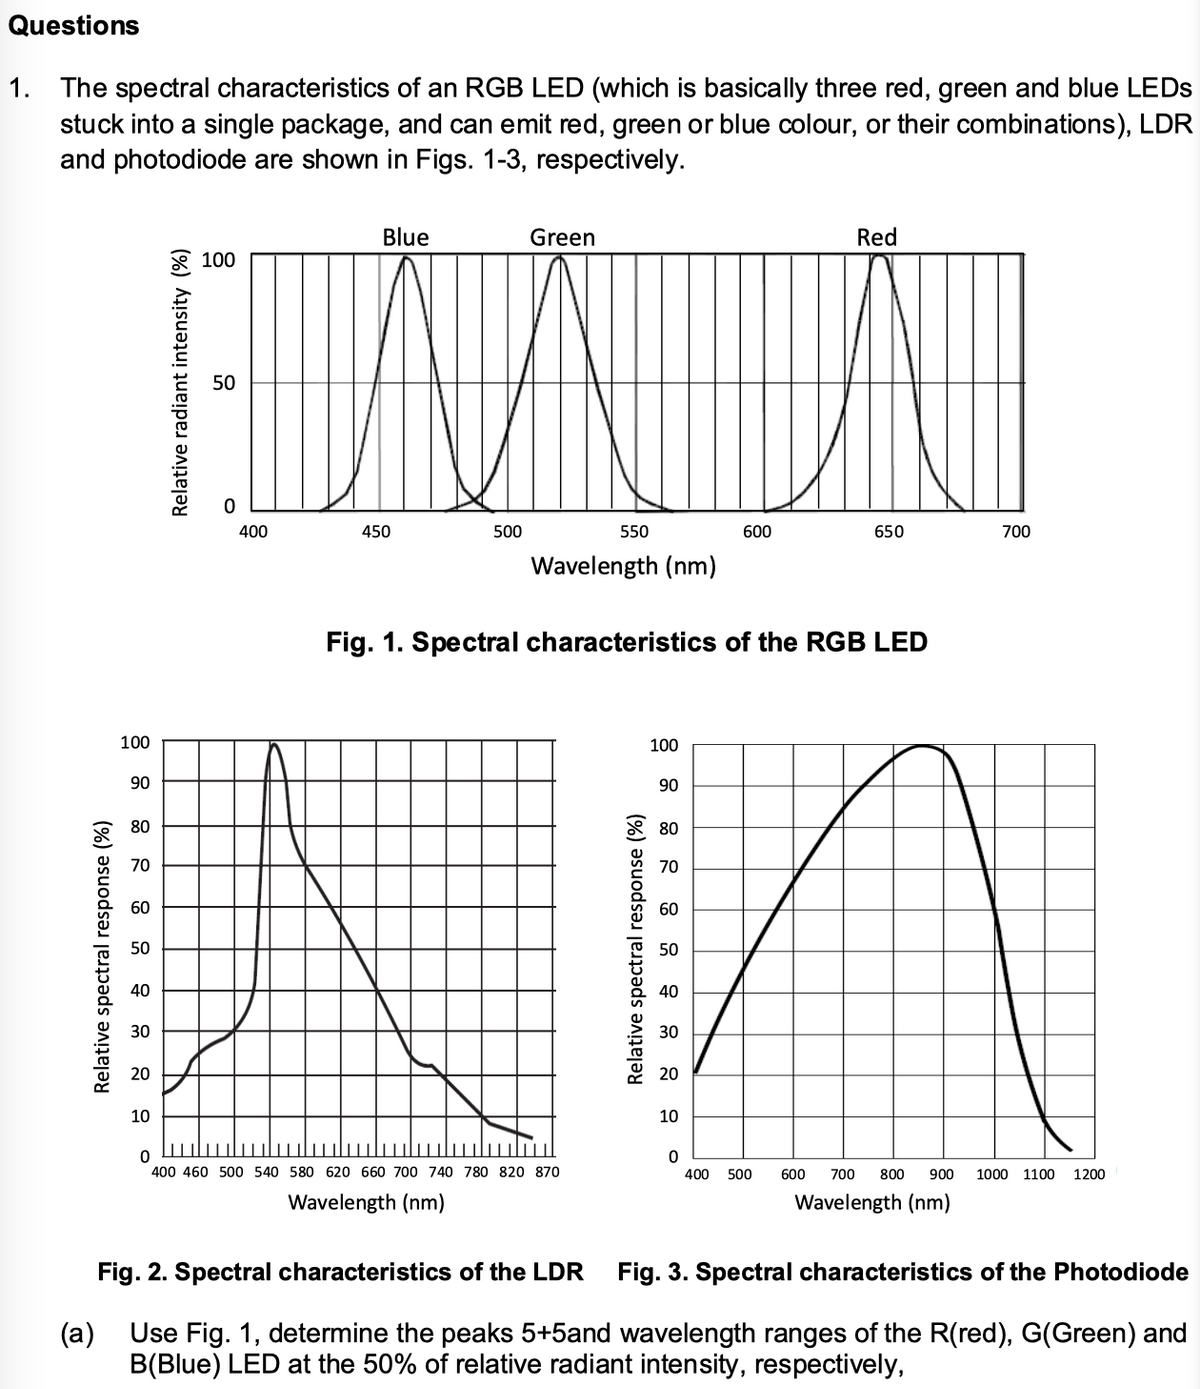 Questions
1.
The spectral characteristics of an RGB LED (which is basically three red, green and blue LEDs
stuck into a single package, and can emit red, green or blue colour, or their combinations), LDR
and photodiode are shown in Figs. 1-3, respectively.
Relative spectral response (%)
100
90
80
70
60
50
40
30
20
10
Green
HIWALN
550
100
50
400
Blue
450
500
Wavelength (nm)
0
400 460 500 540 580 620 660 700 740 780 820 870
Wavelength (nm)
Relative spectral response (%)
Fig. 1. Spectral characteristics of the RGB LED
100
90
80
70
60
50
40
30
20
10
600
0
Red
400 500
650
700
600 700 800 900 1000 1100 1200
Wavelength (nm)
Fig. 2. Spectral characteristics of the LDR
Fig. 3. Spectral characteristics of the Photodiode
(a)
Use Fig. 1, determine the peaks 5+5and wavelength ranges of the R(red), G(Green) and
B(Blue) LED at the 50% of relative radiant intensity, respectively,